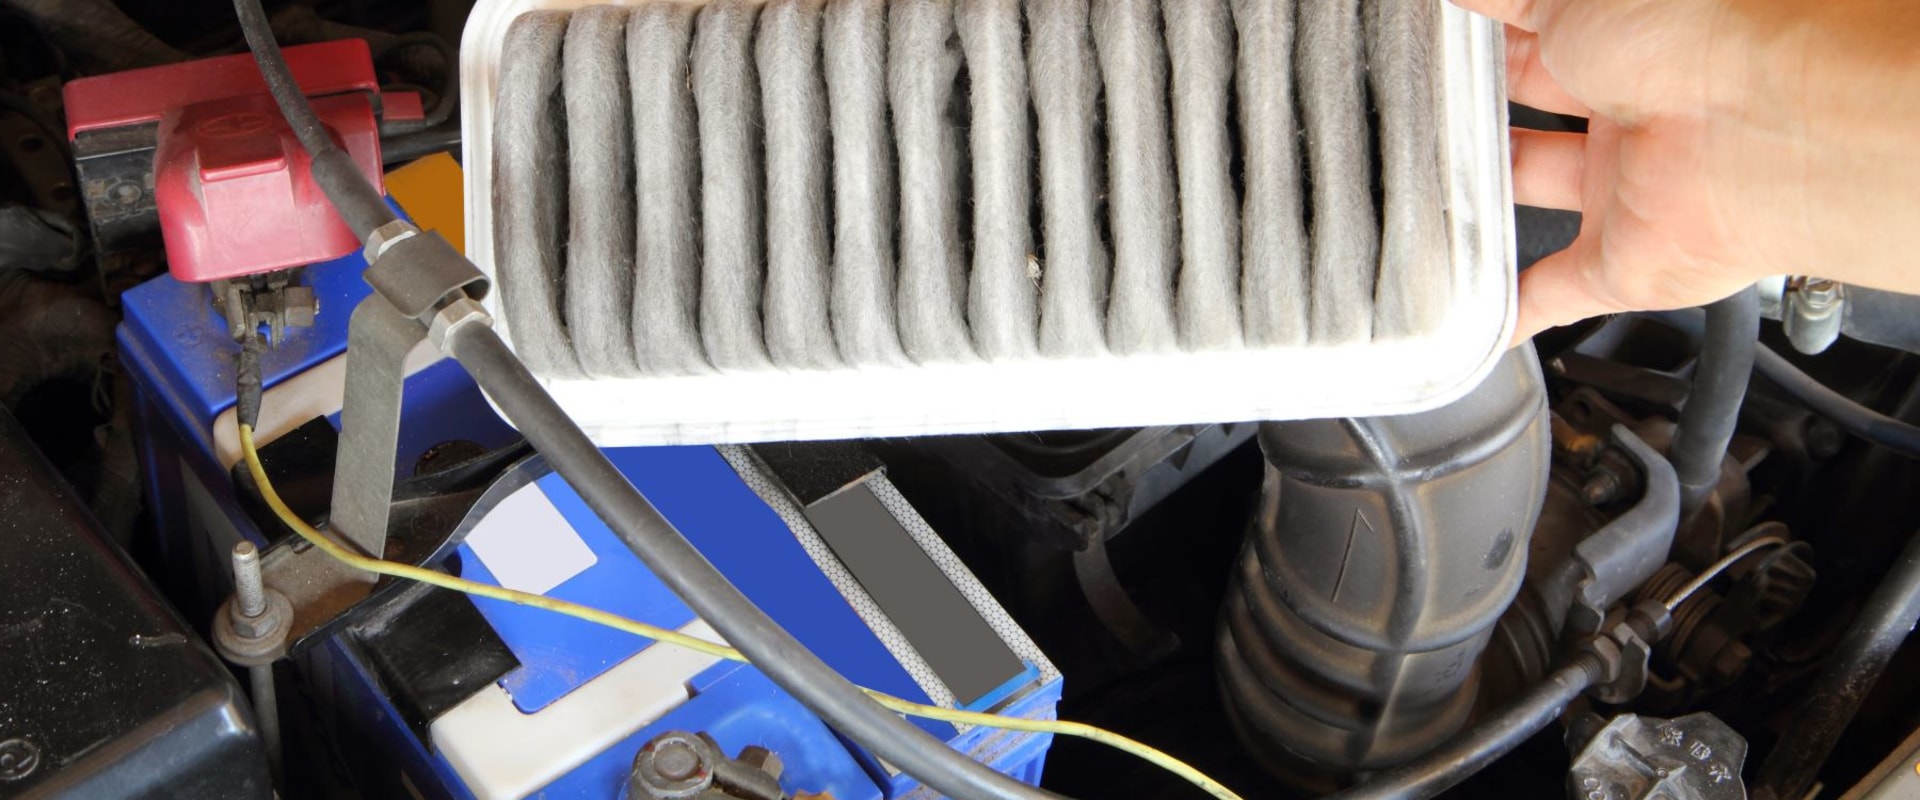 How a Dirty Air Filter Can Affect Your AC